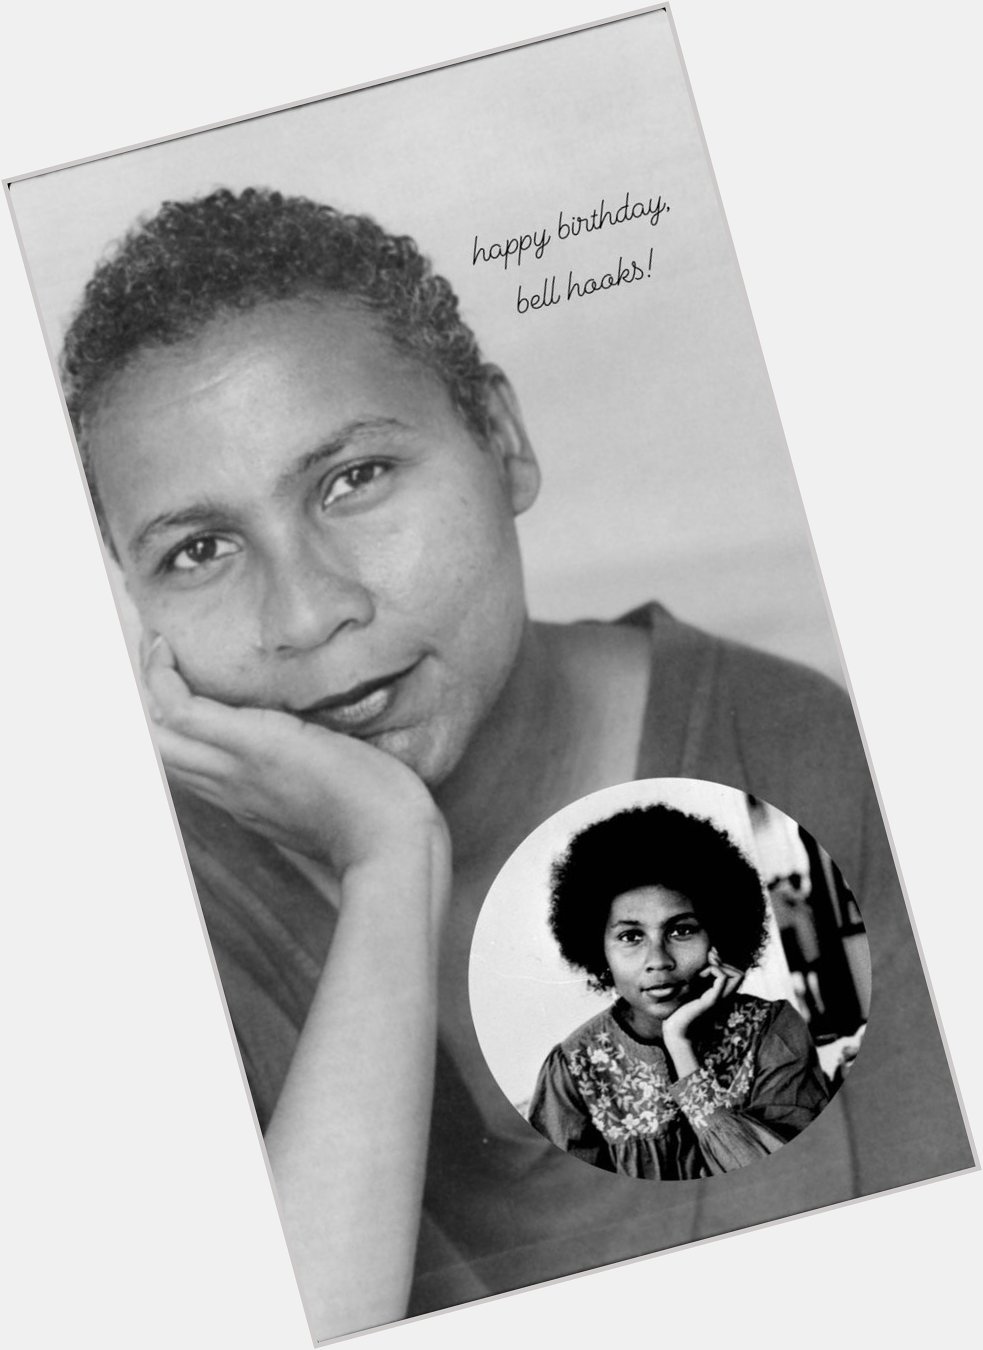 Happy birthday, bell hooks! Very grateful for her mind, her insight, and her deep care for our Folk. 